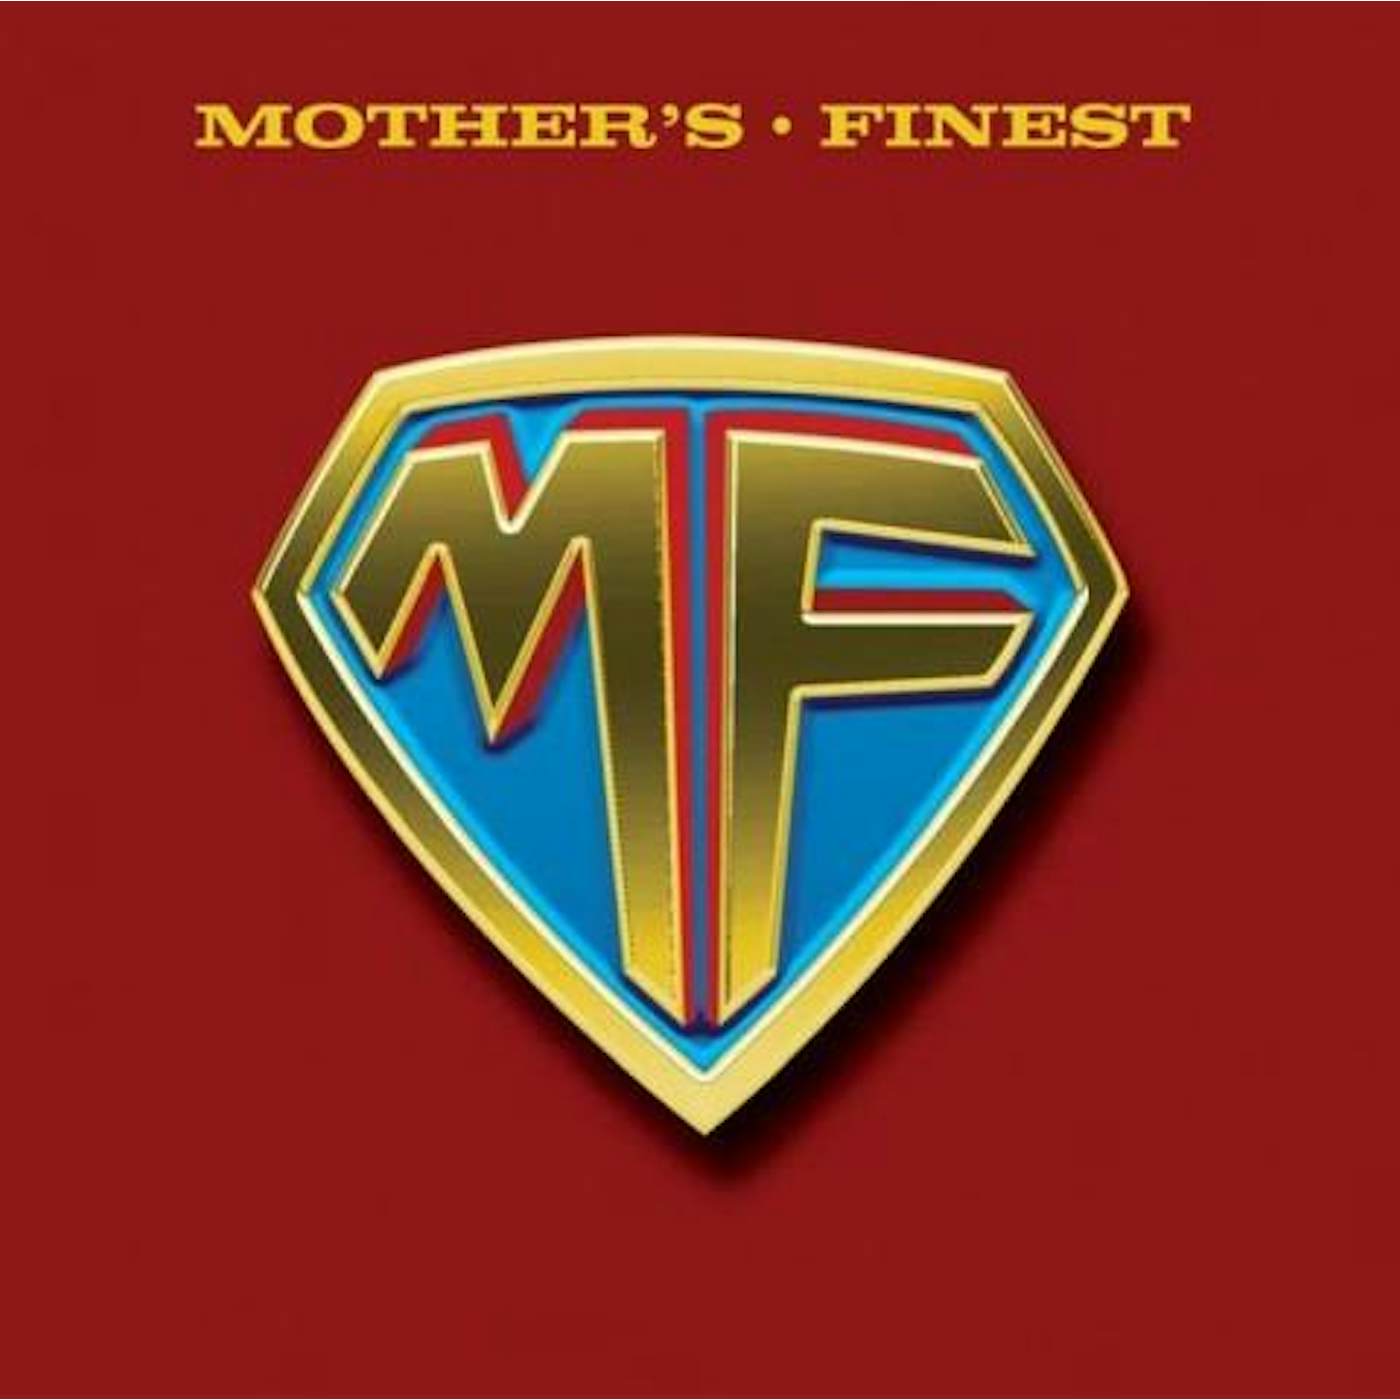 MOTHER'S FINEST CD